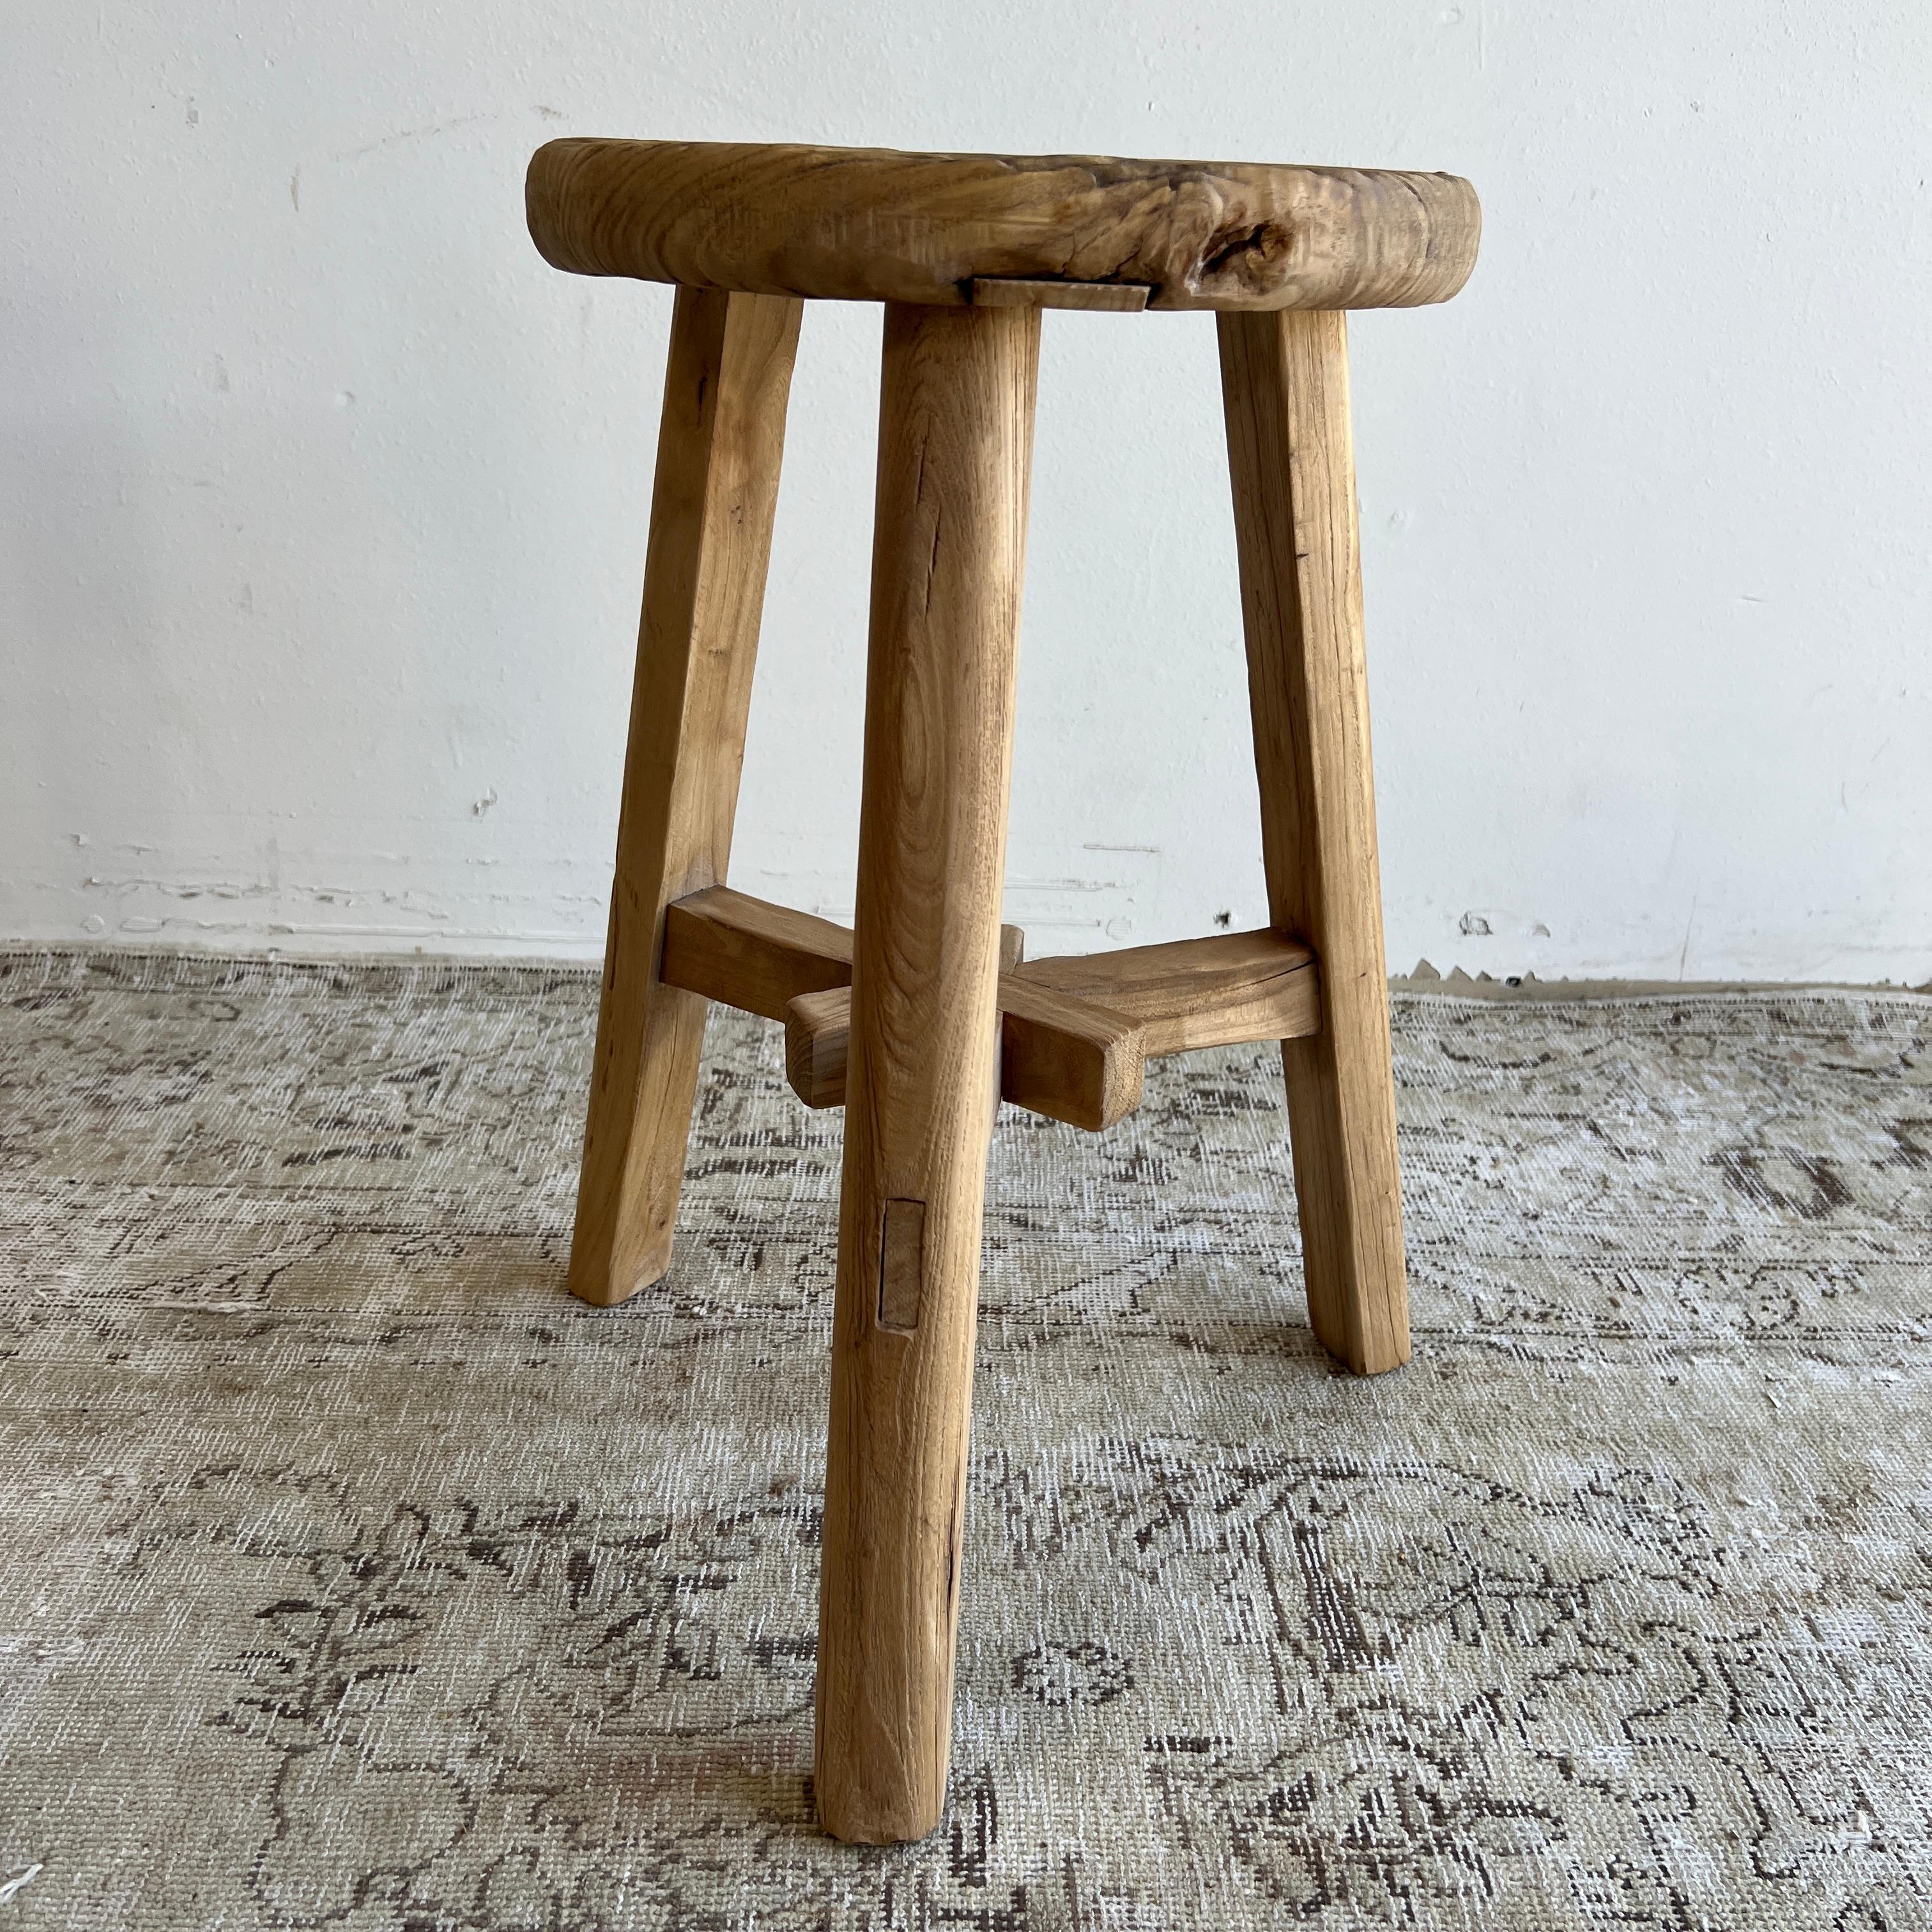 These are the real vintage antique elm wood stools! Beautiful antique patina, with weathering and age, these are solid and sturdy ready for daily use, use as a table, stool, drink table, they are great for any space
Size: 15